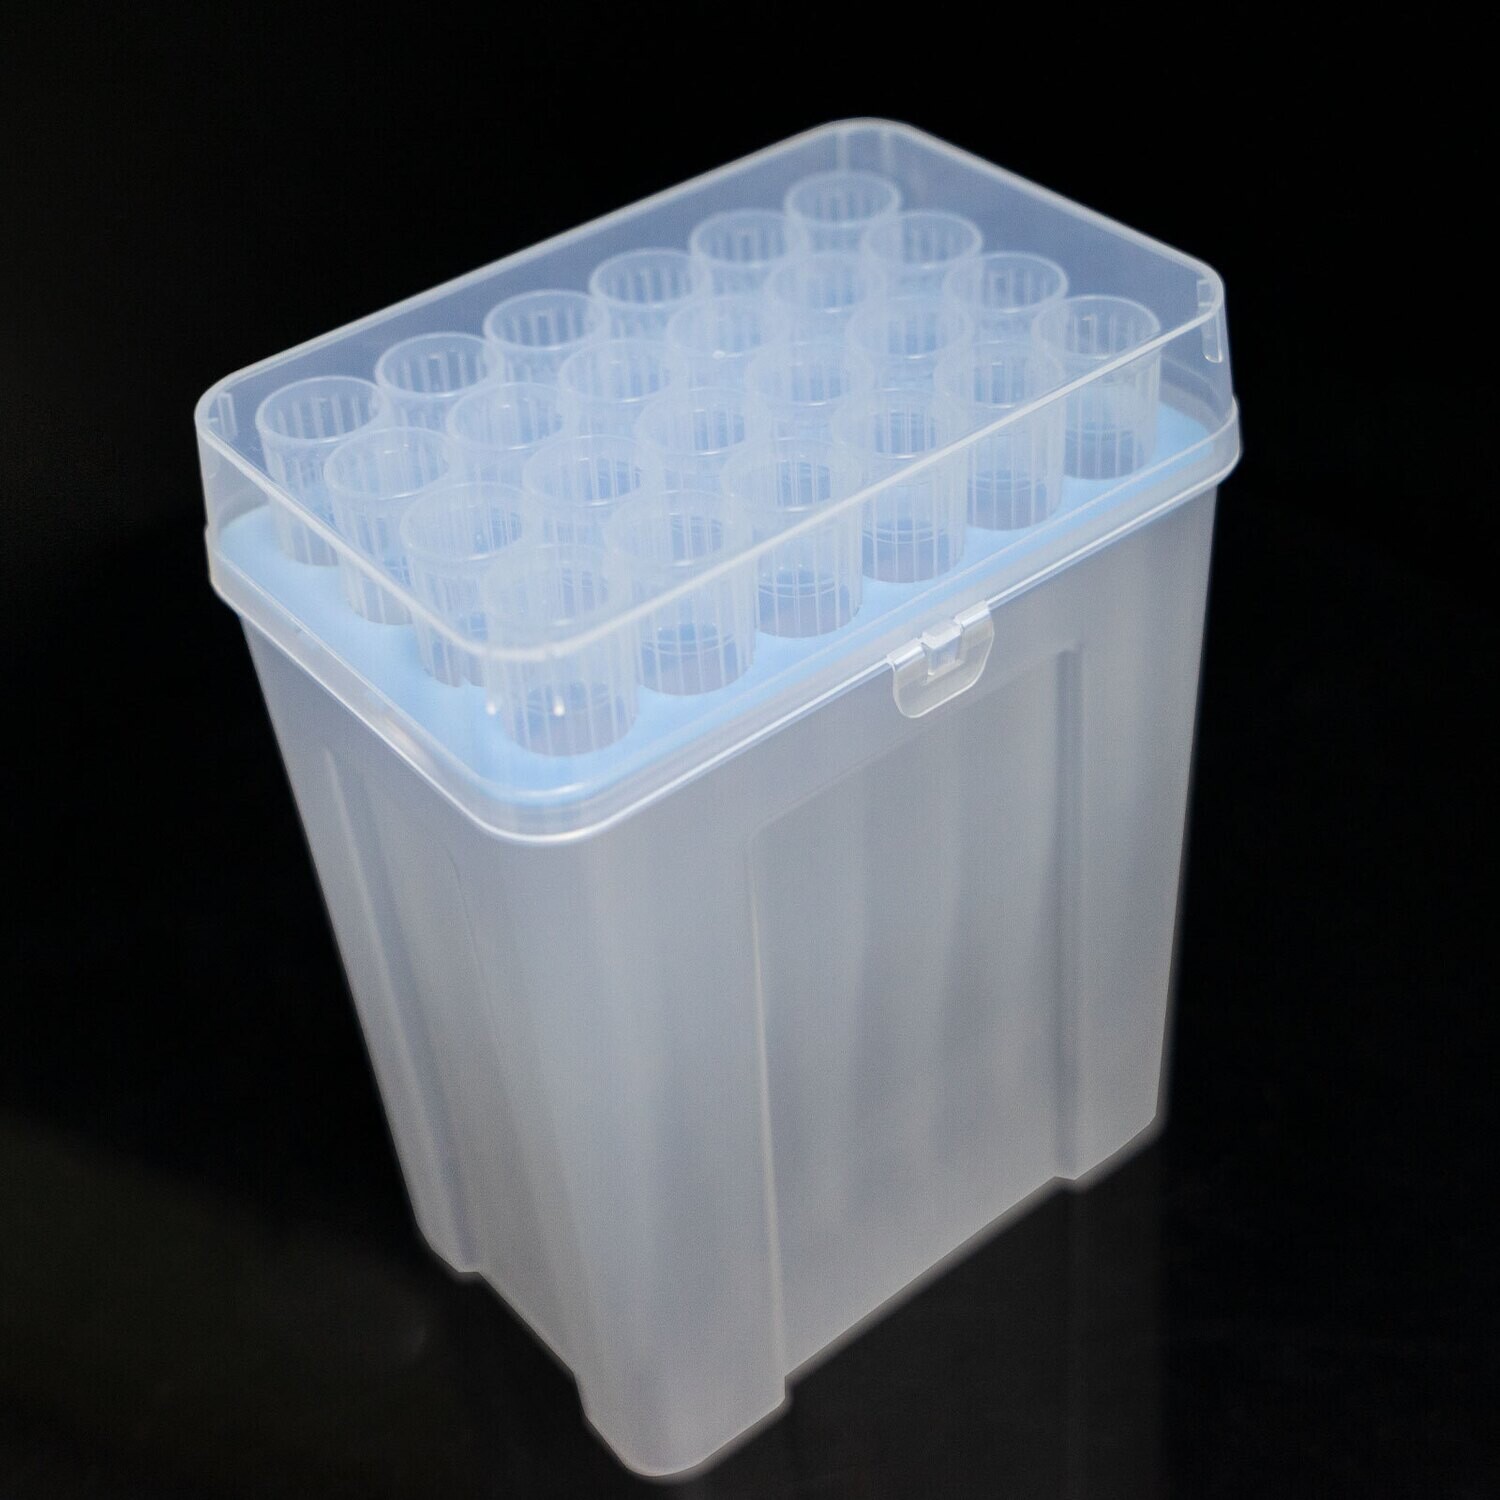 Biologix Pipet Tips, Volume: 10ml, PP, Clear, Sterile, Fit for 1-10ml Thermo Finnpipette F3, 24/Rack, 40 Racks/Case